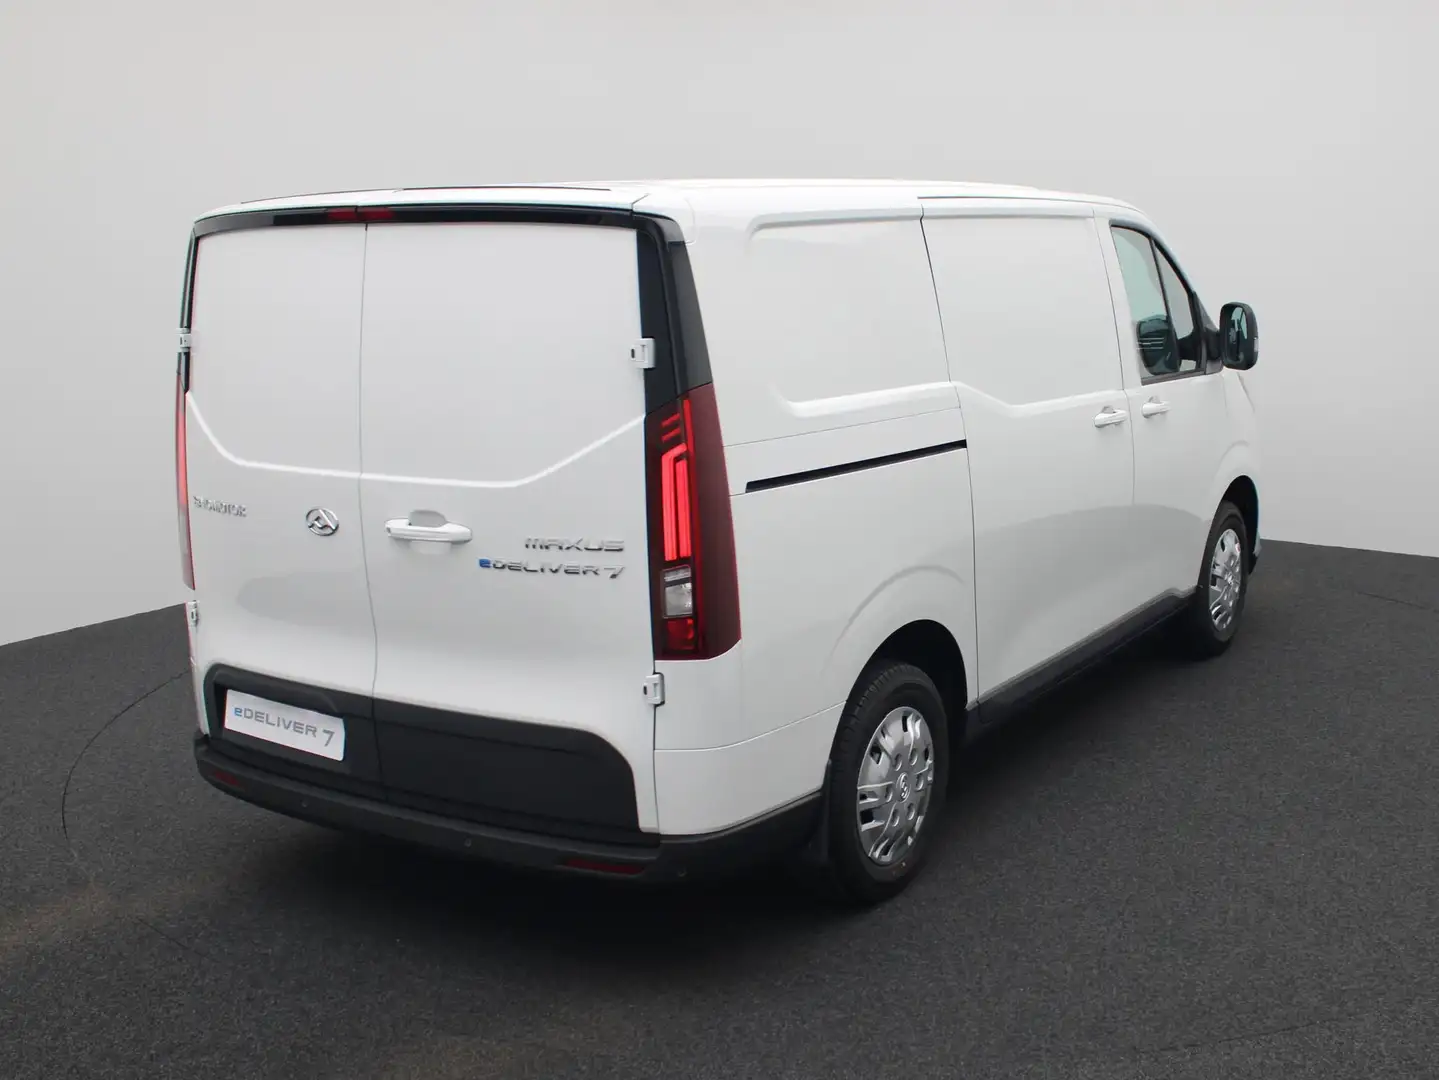 Maxus eDeliver7 L1H1 88 kWh 542 KM WLTP STAD | Subsidie - 2